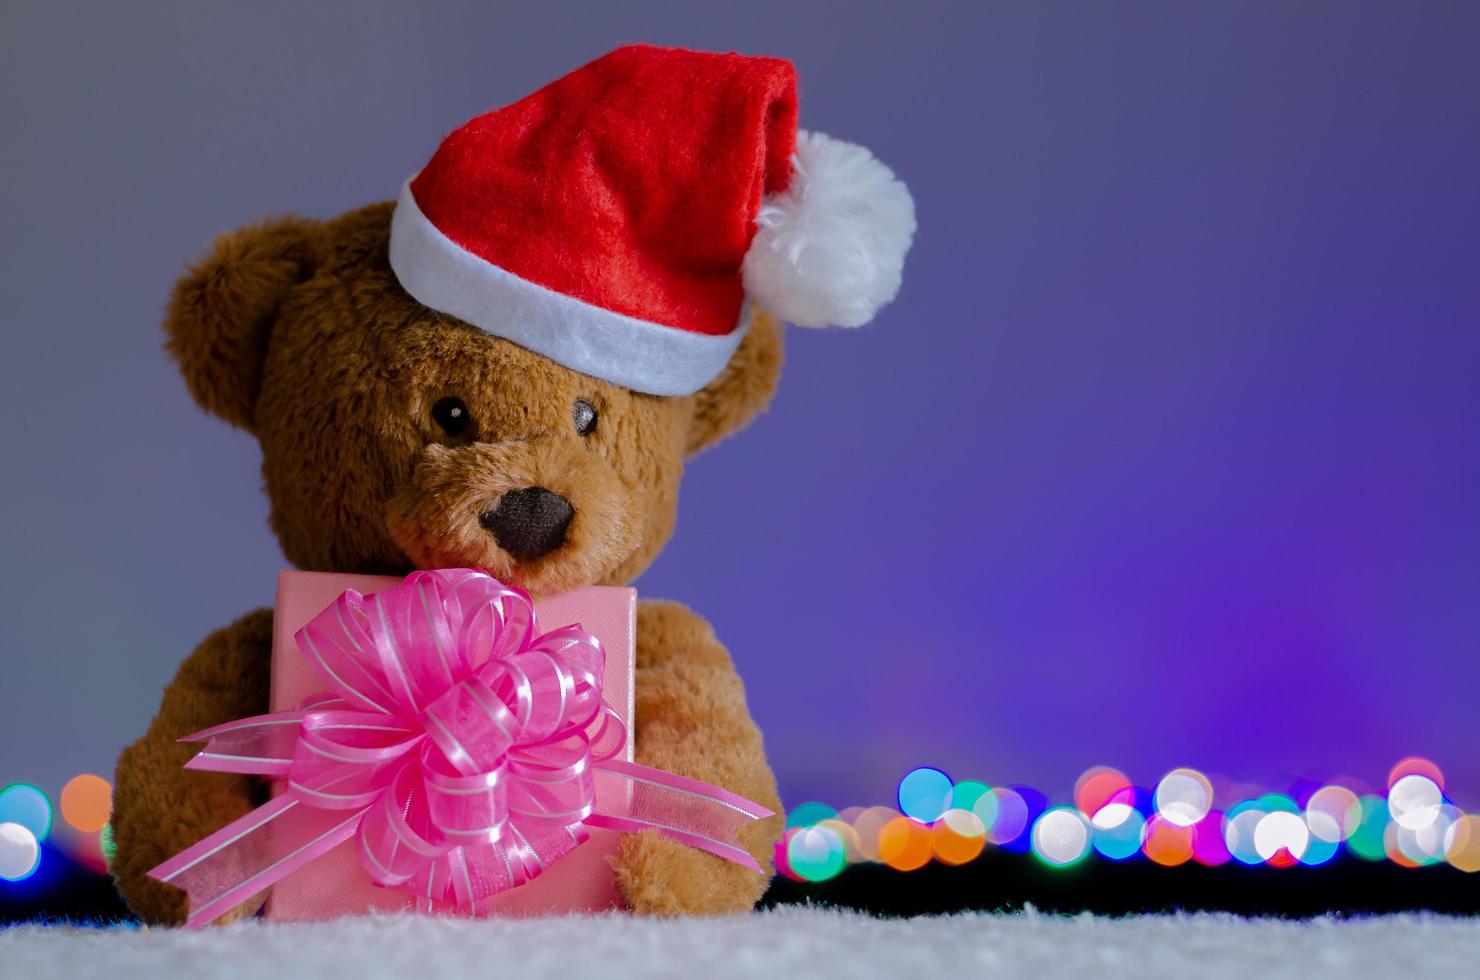 Brown teddy bear wearing santa claus hat holding partial focus of Christmas gift box and bokeh lights background. photo